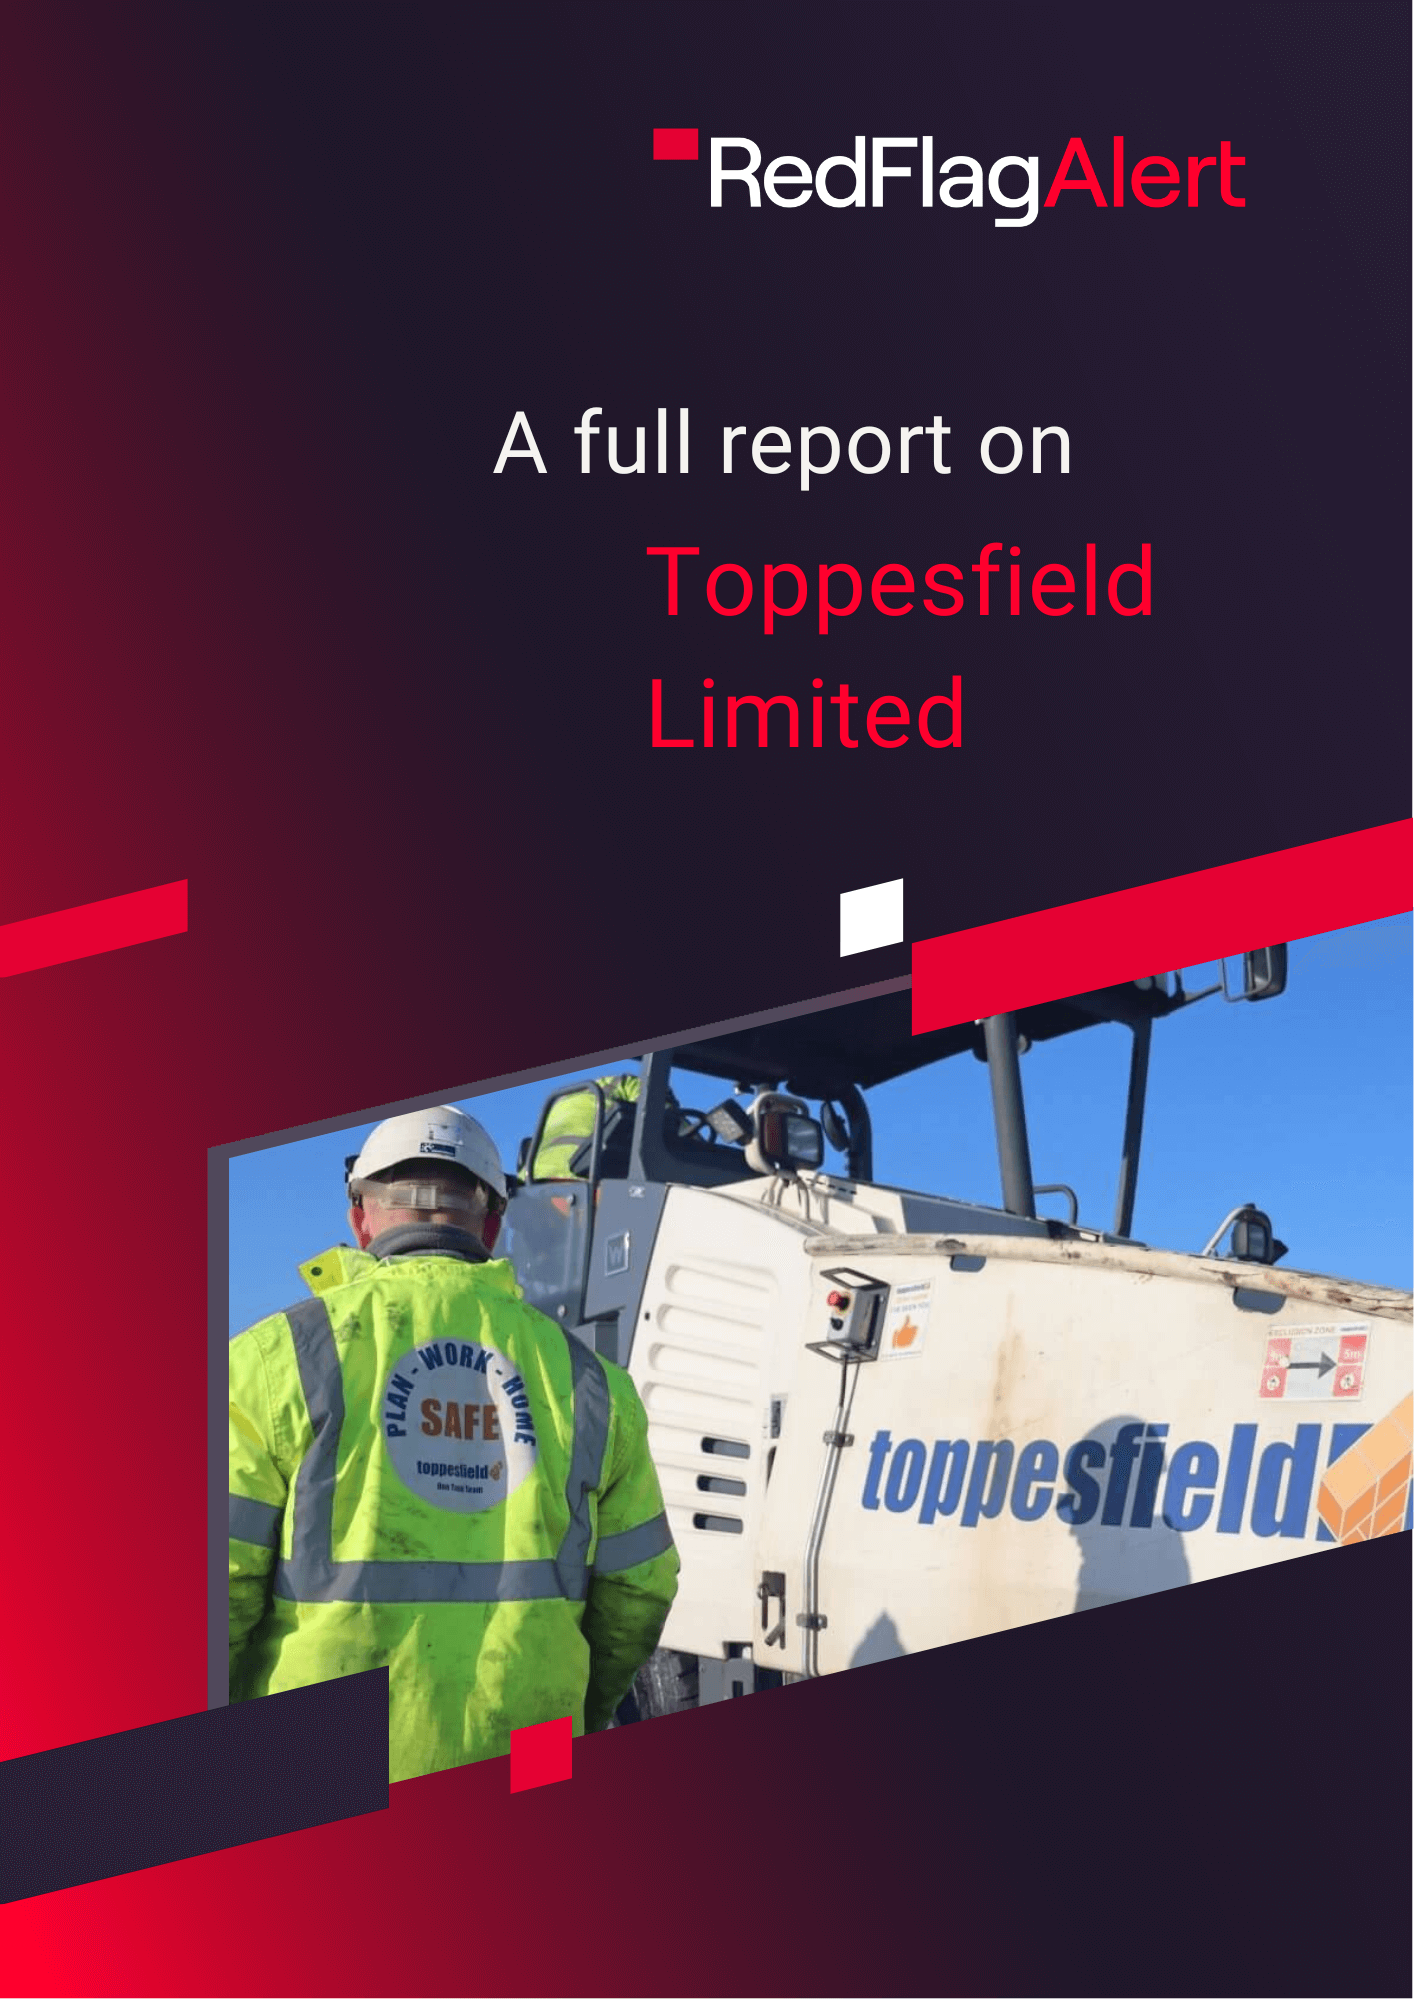 Toppesfield Limited financial distress